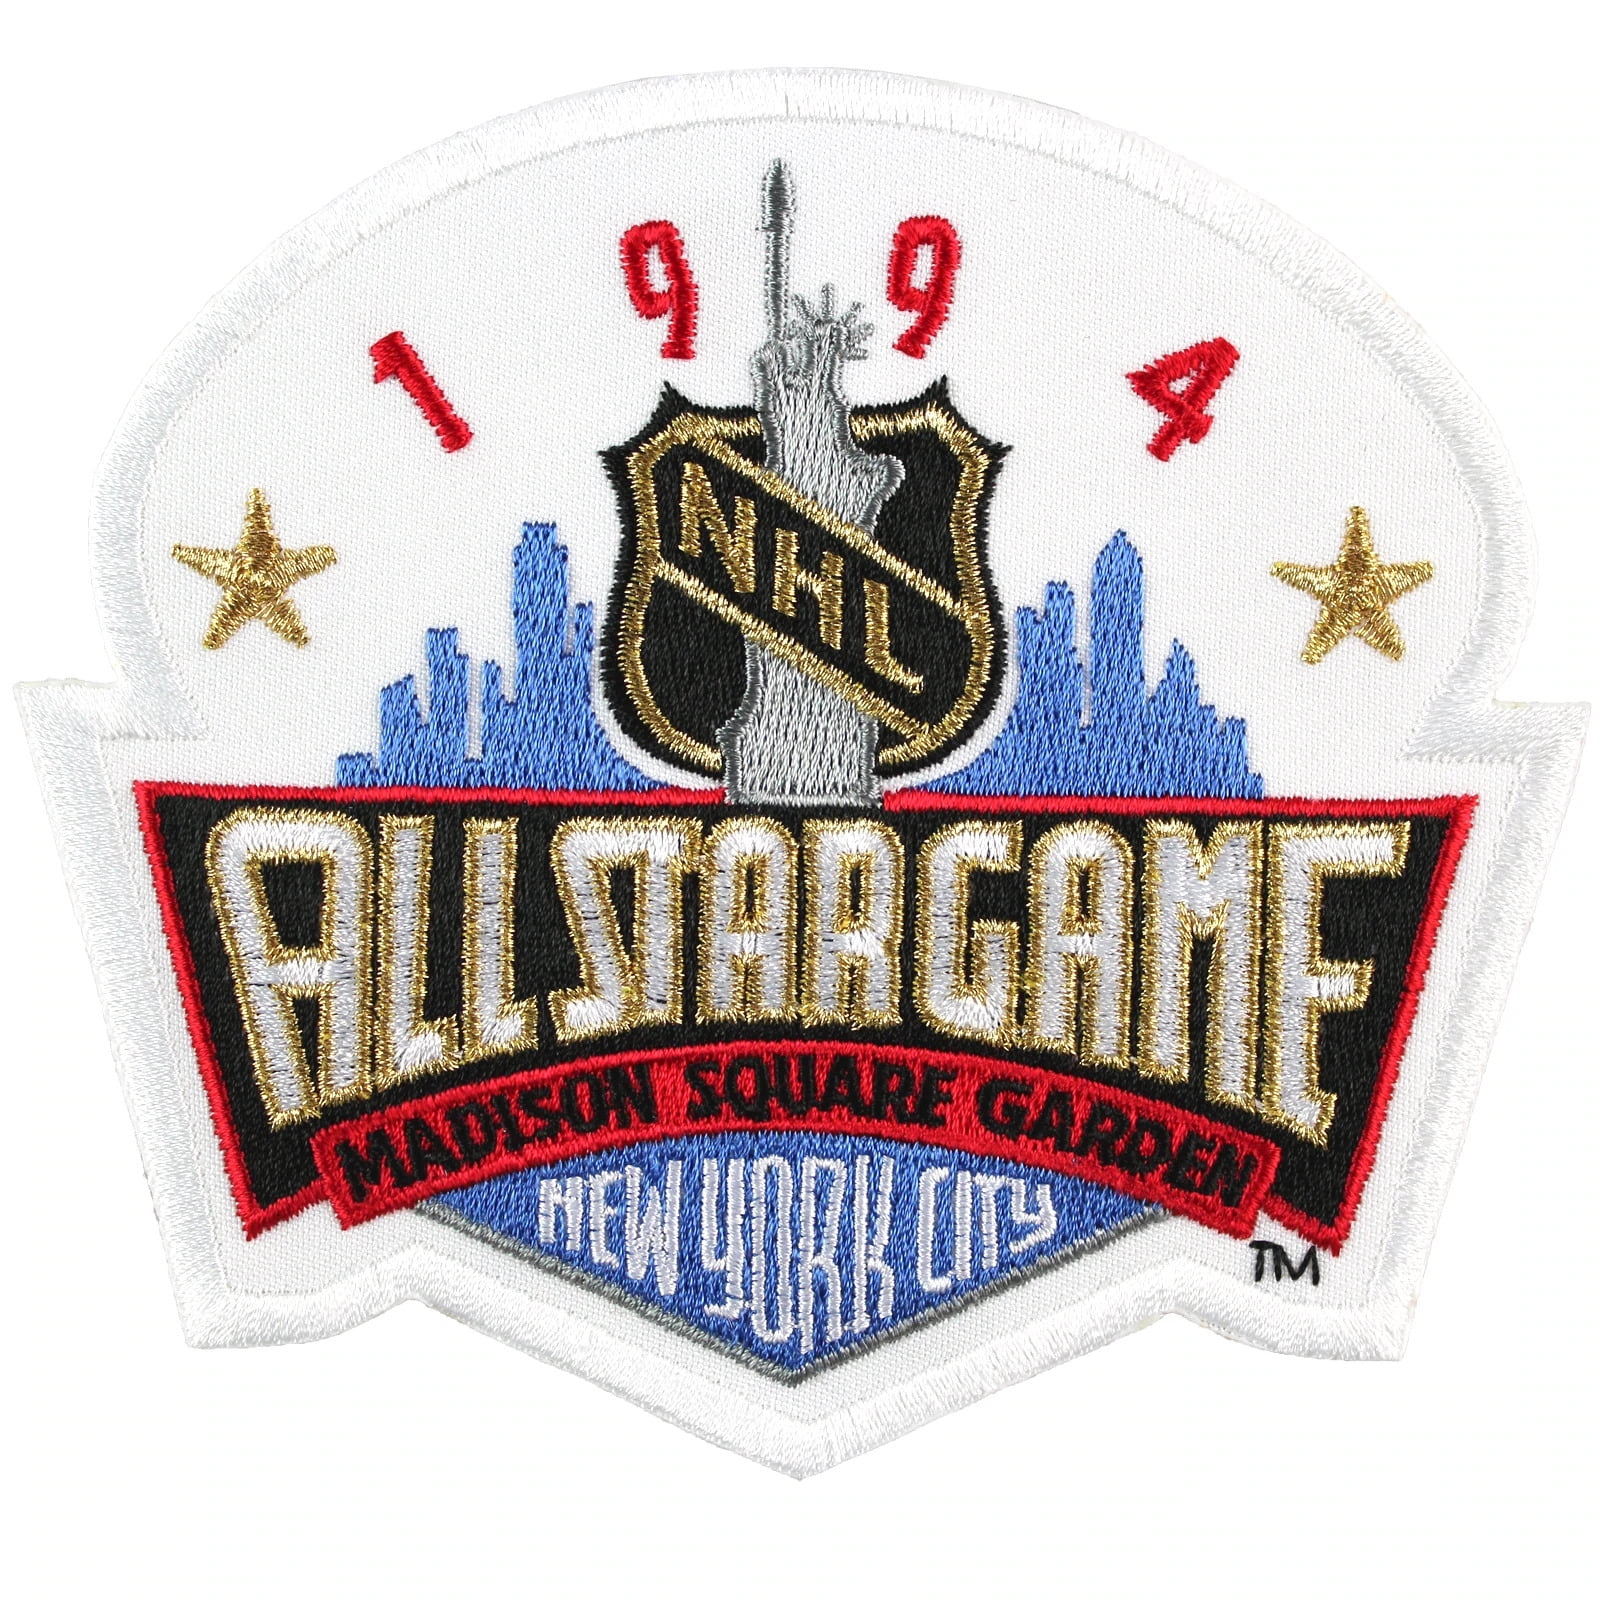 1994 NHL All-Star Game in Madison Square Garden in New York City